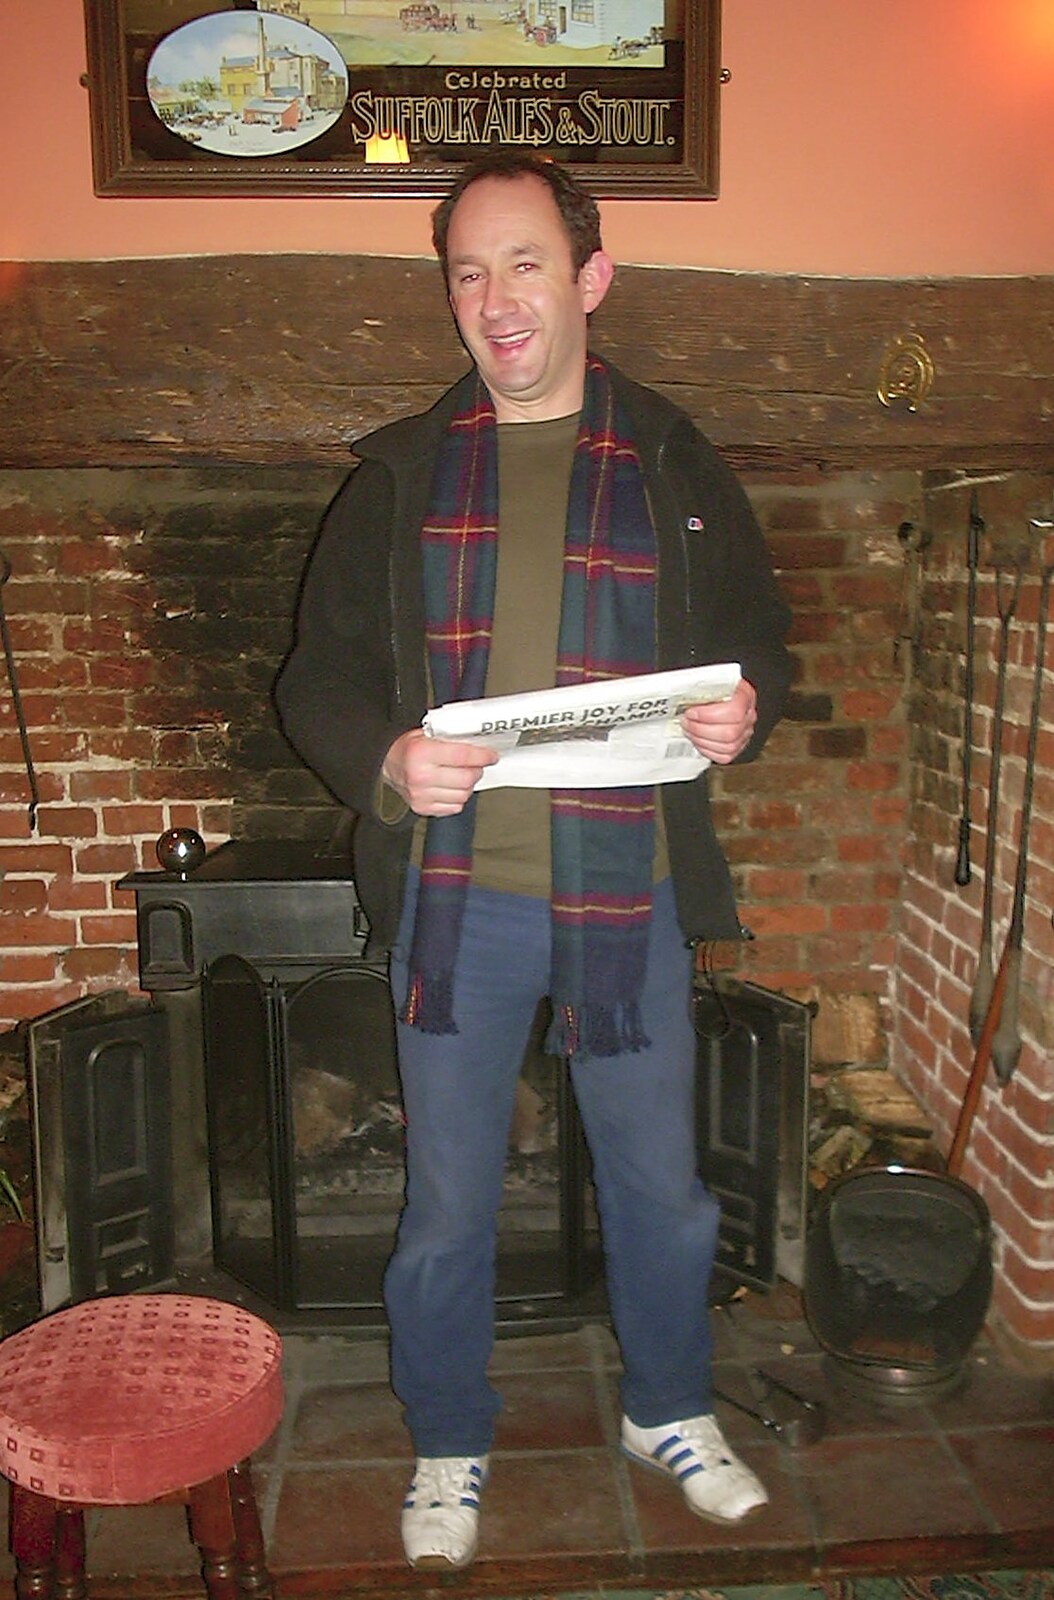 DH with a tartan scarf from The Swan's Cellar, and Bill's Mambo Night at the Barrel, Banham, Norfolk - 6th February 2004